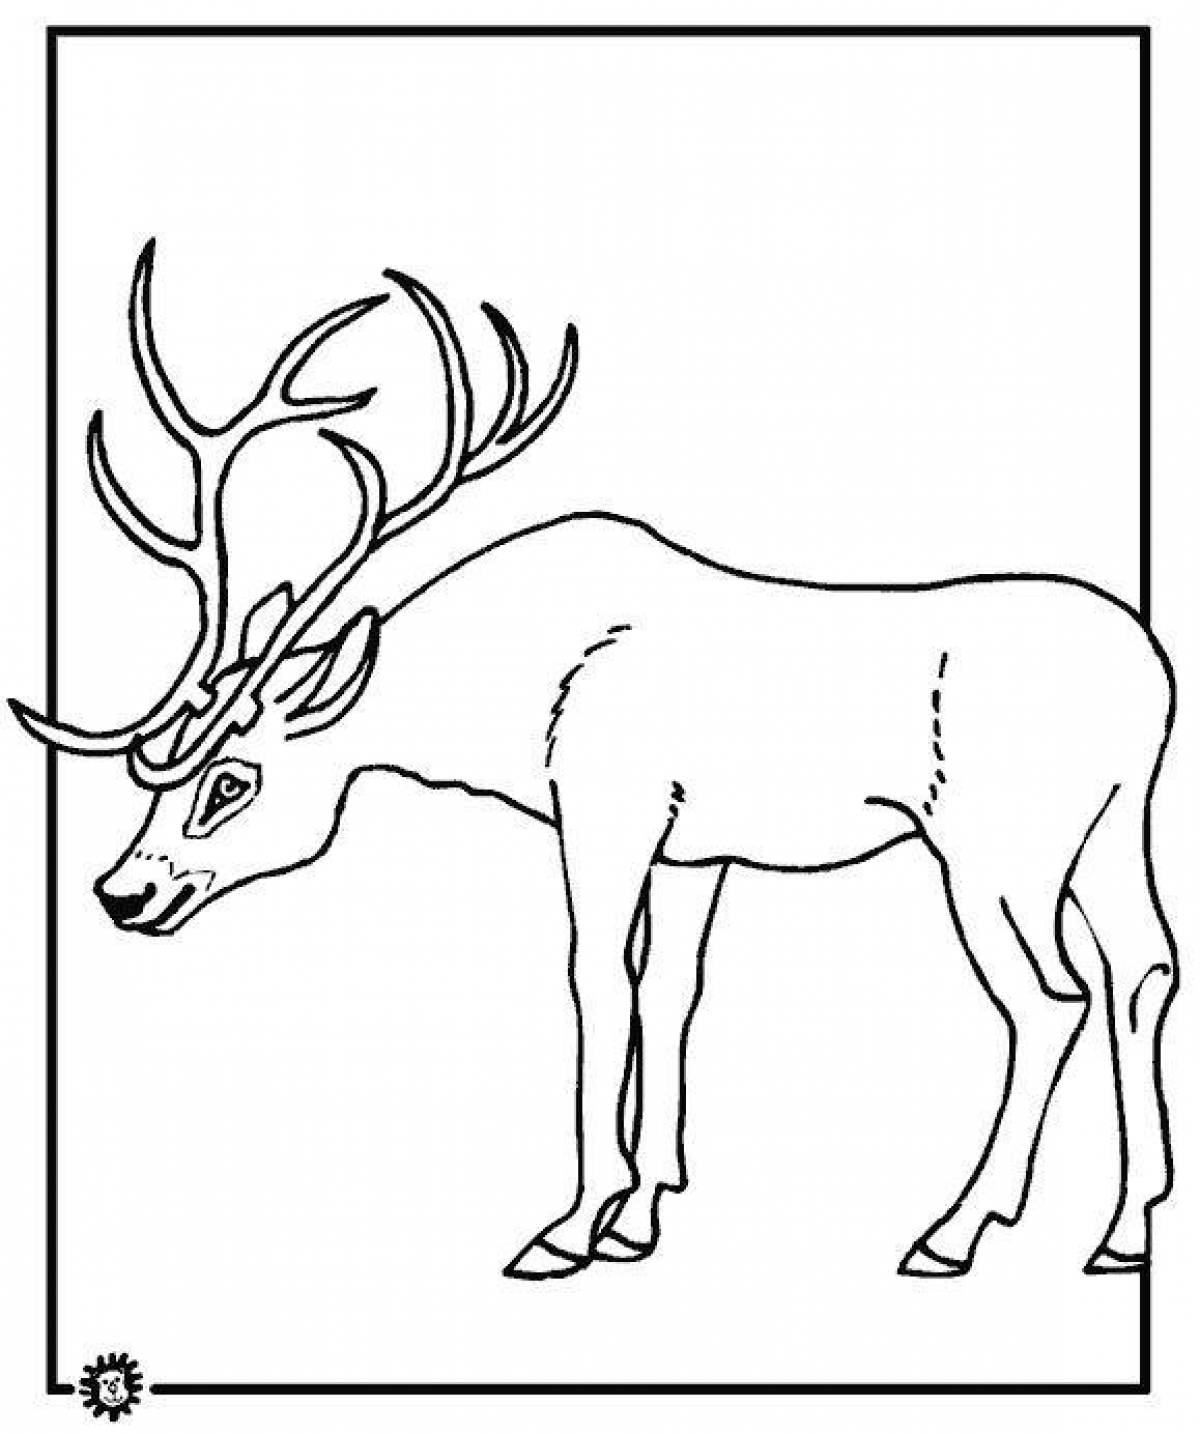 Exciting reindeer coloring book